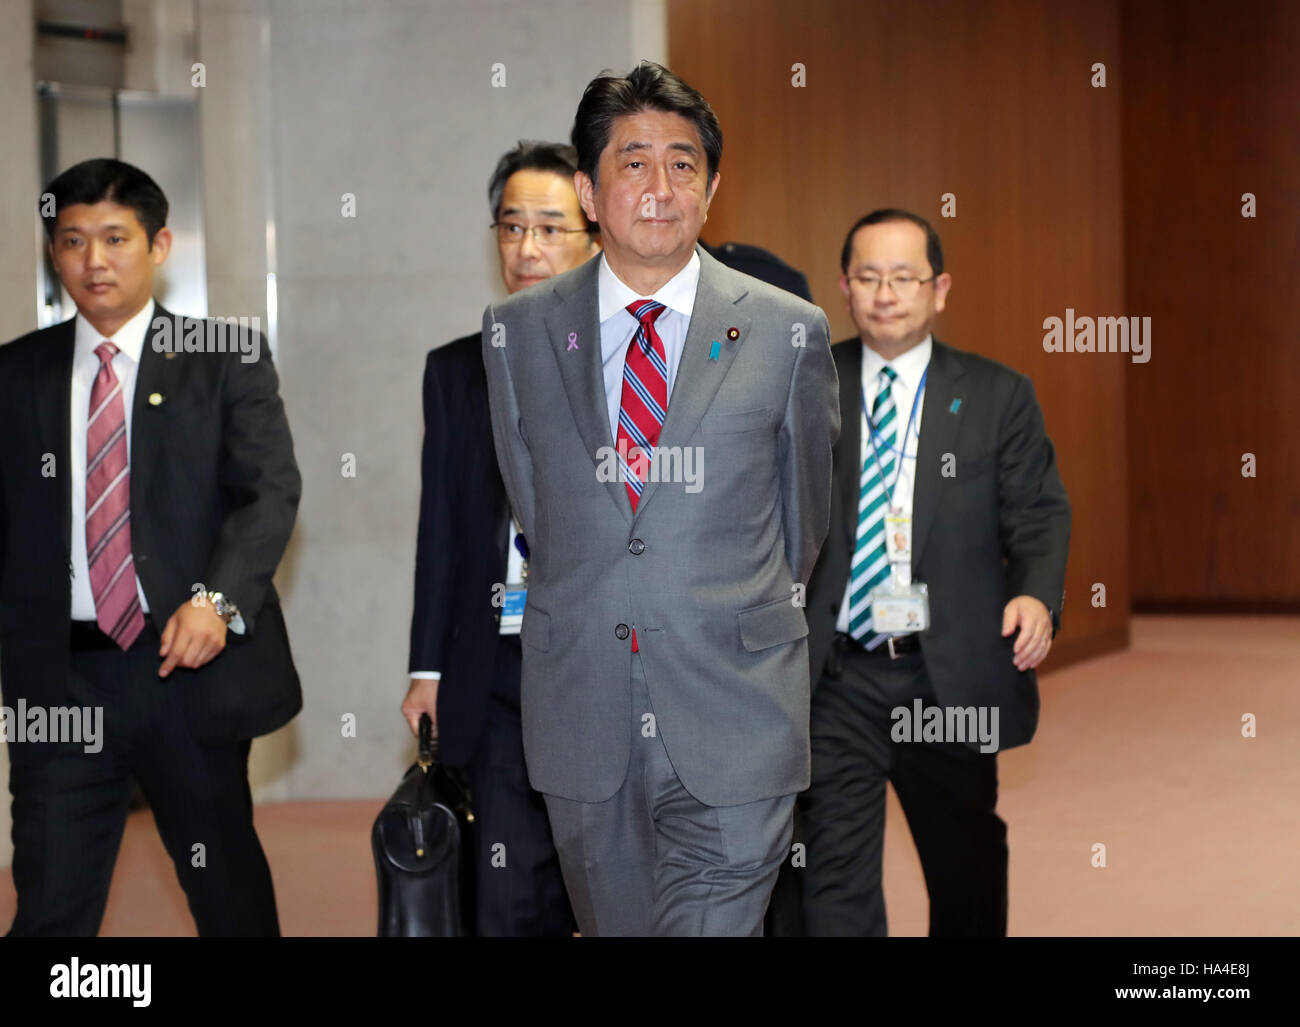 Tokyo, Japan. 25th Nov, 2016. Japanese Prime Minister Shinzo Abe arrives at the Health, Labour and Welfarre committee session of the Lower House at the National Diet in Tokyo on Friday, November 25, 2016. Ruling coalition parties passed the government's pension reform bill at the committee session while opposition parties' members protest against the forced passage of the bill. © Yoshio Tsunoda/AFLO/Alamy Live News Stock Photo